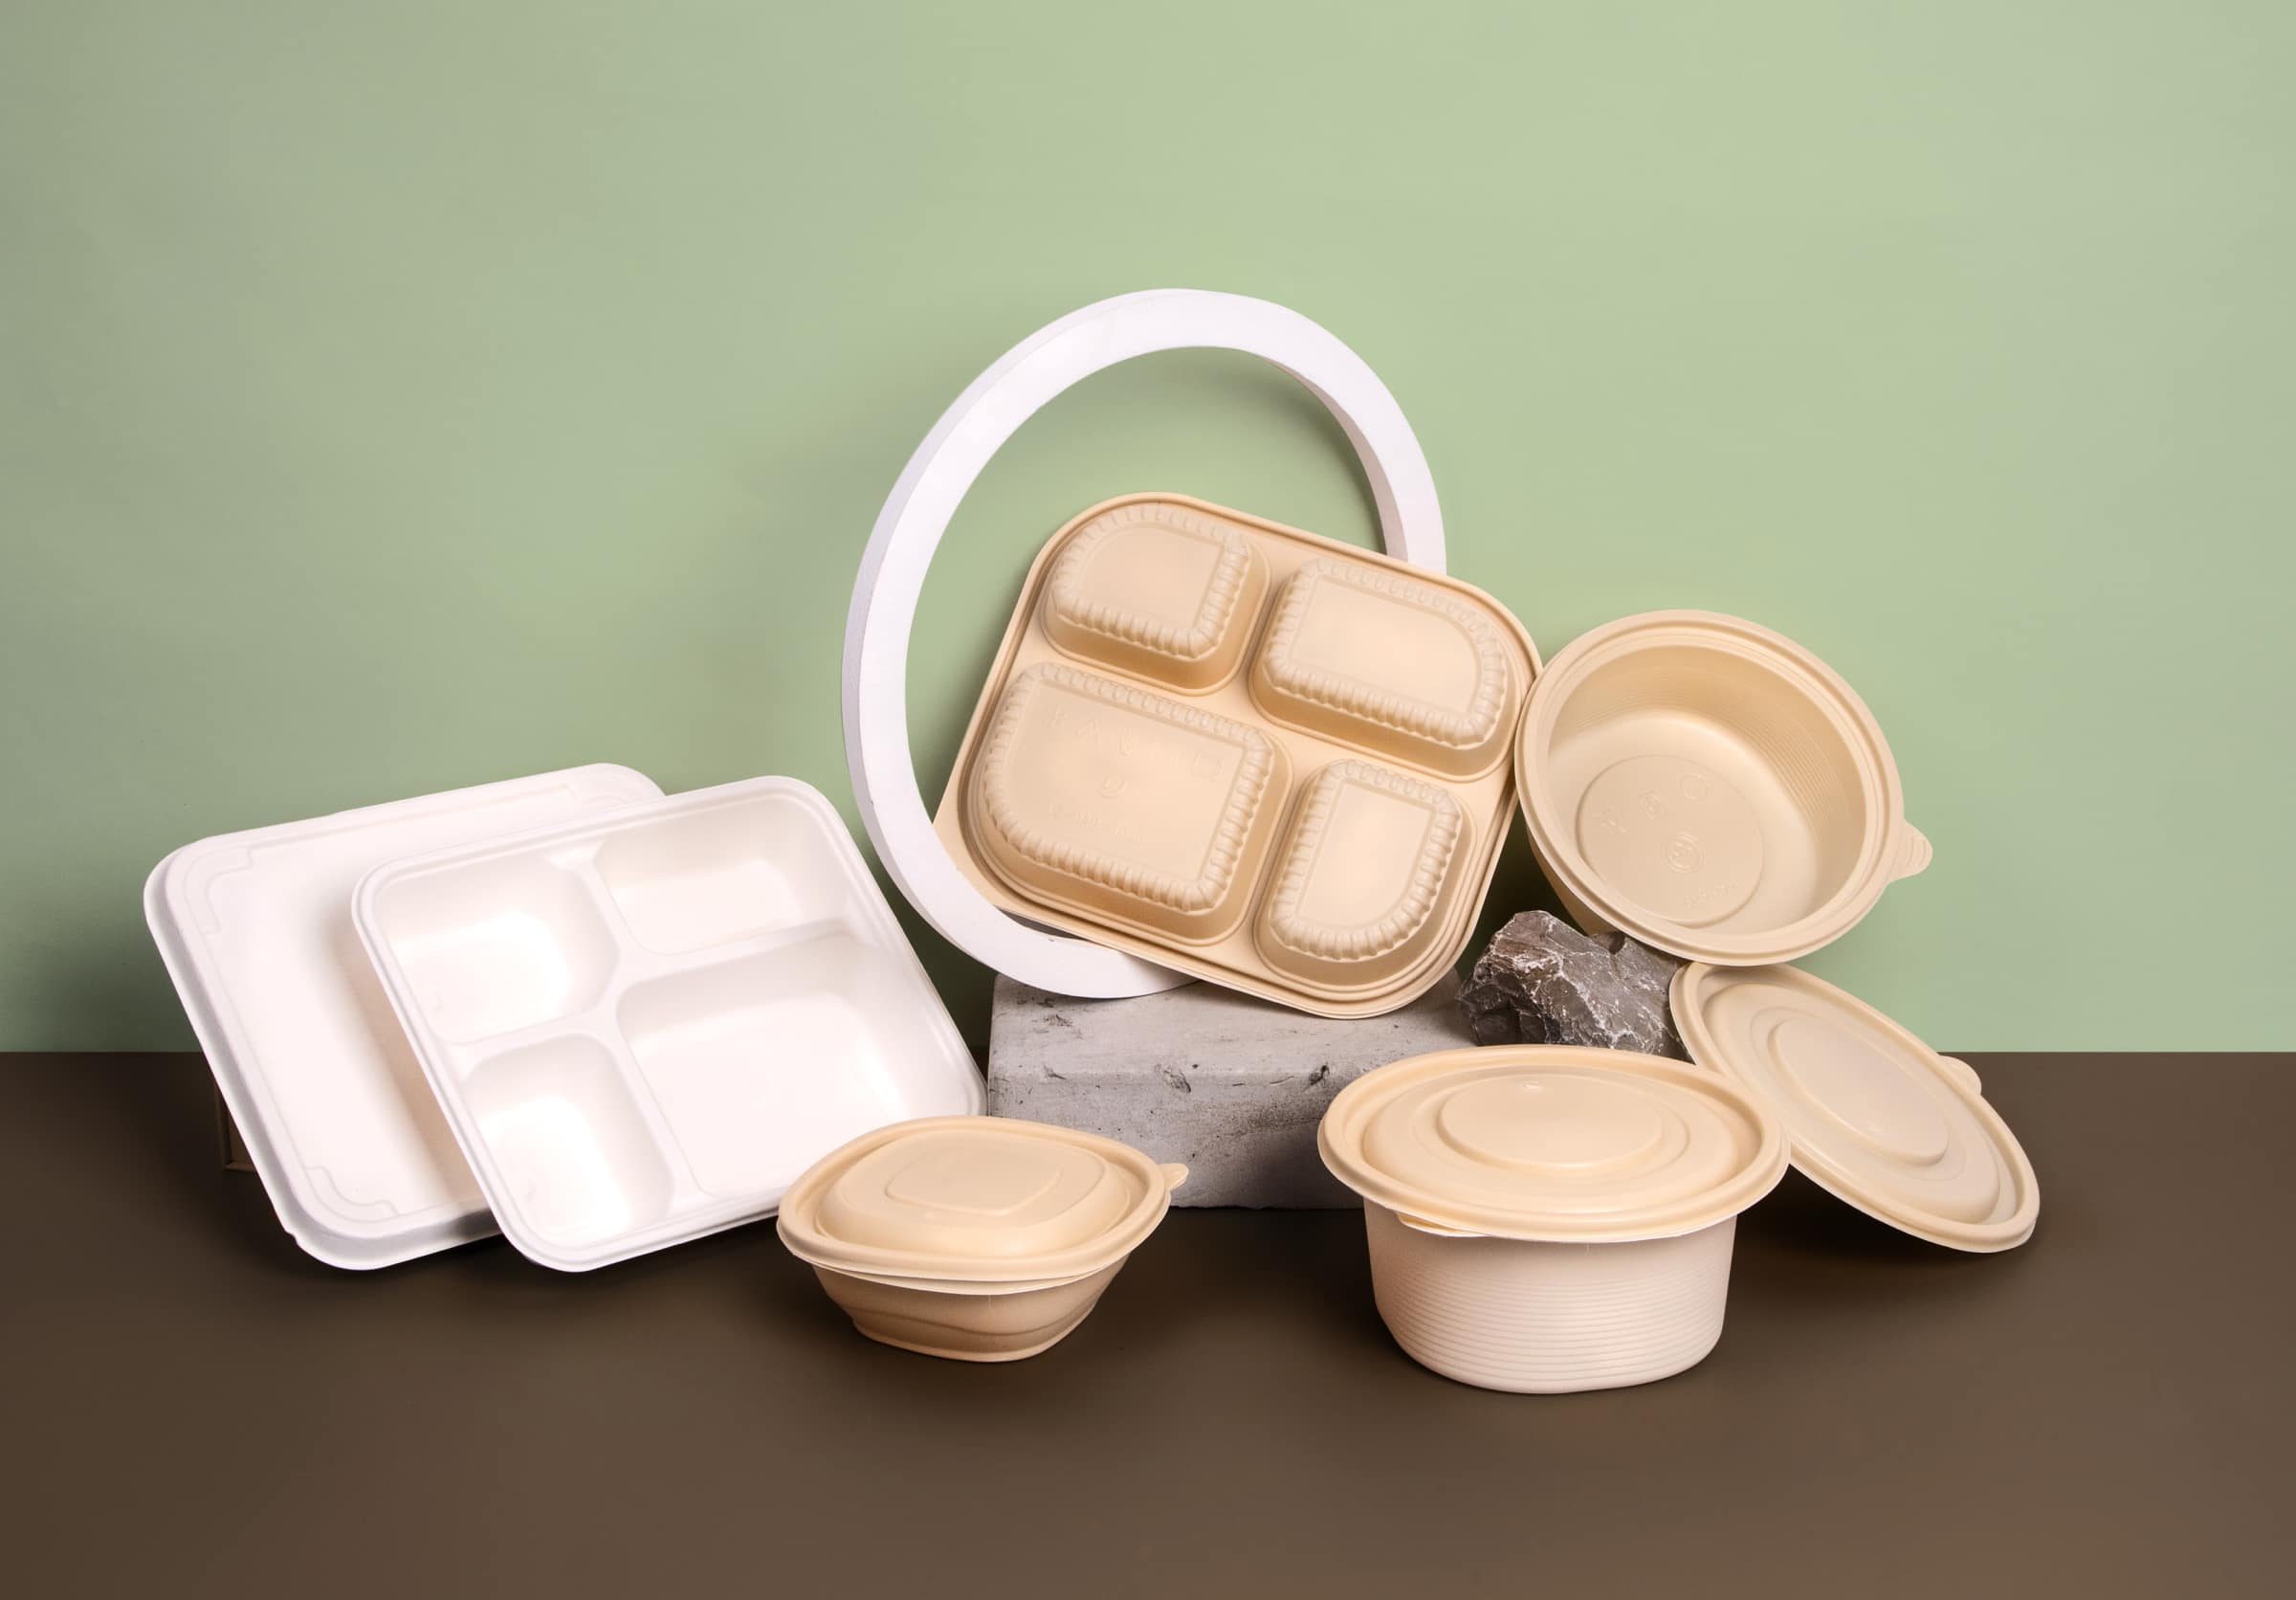 White and brown bioplastic cornstarch packaging container on a green and brown background.